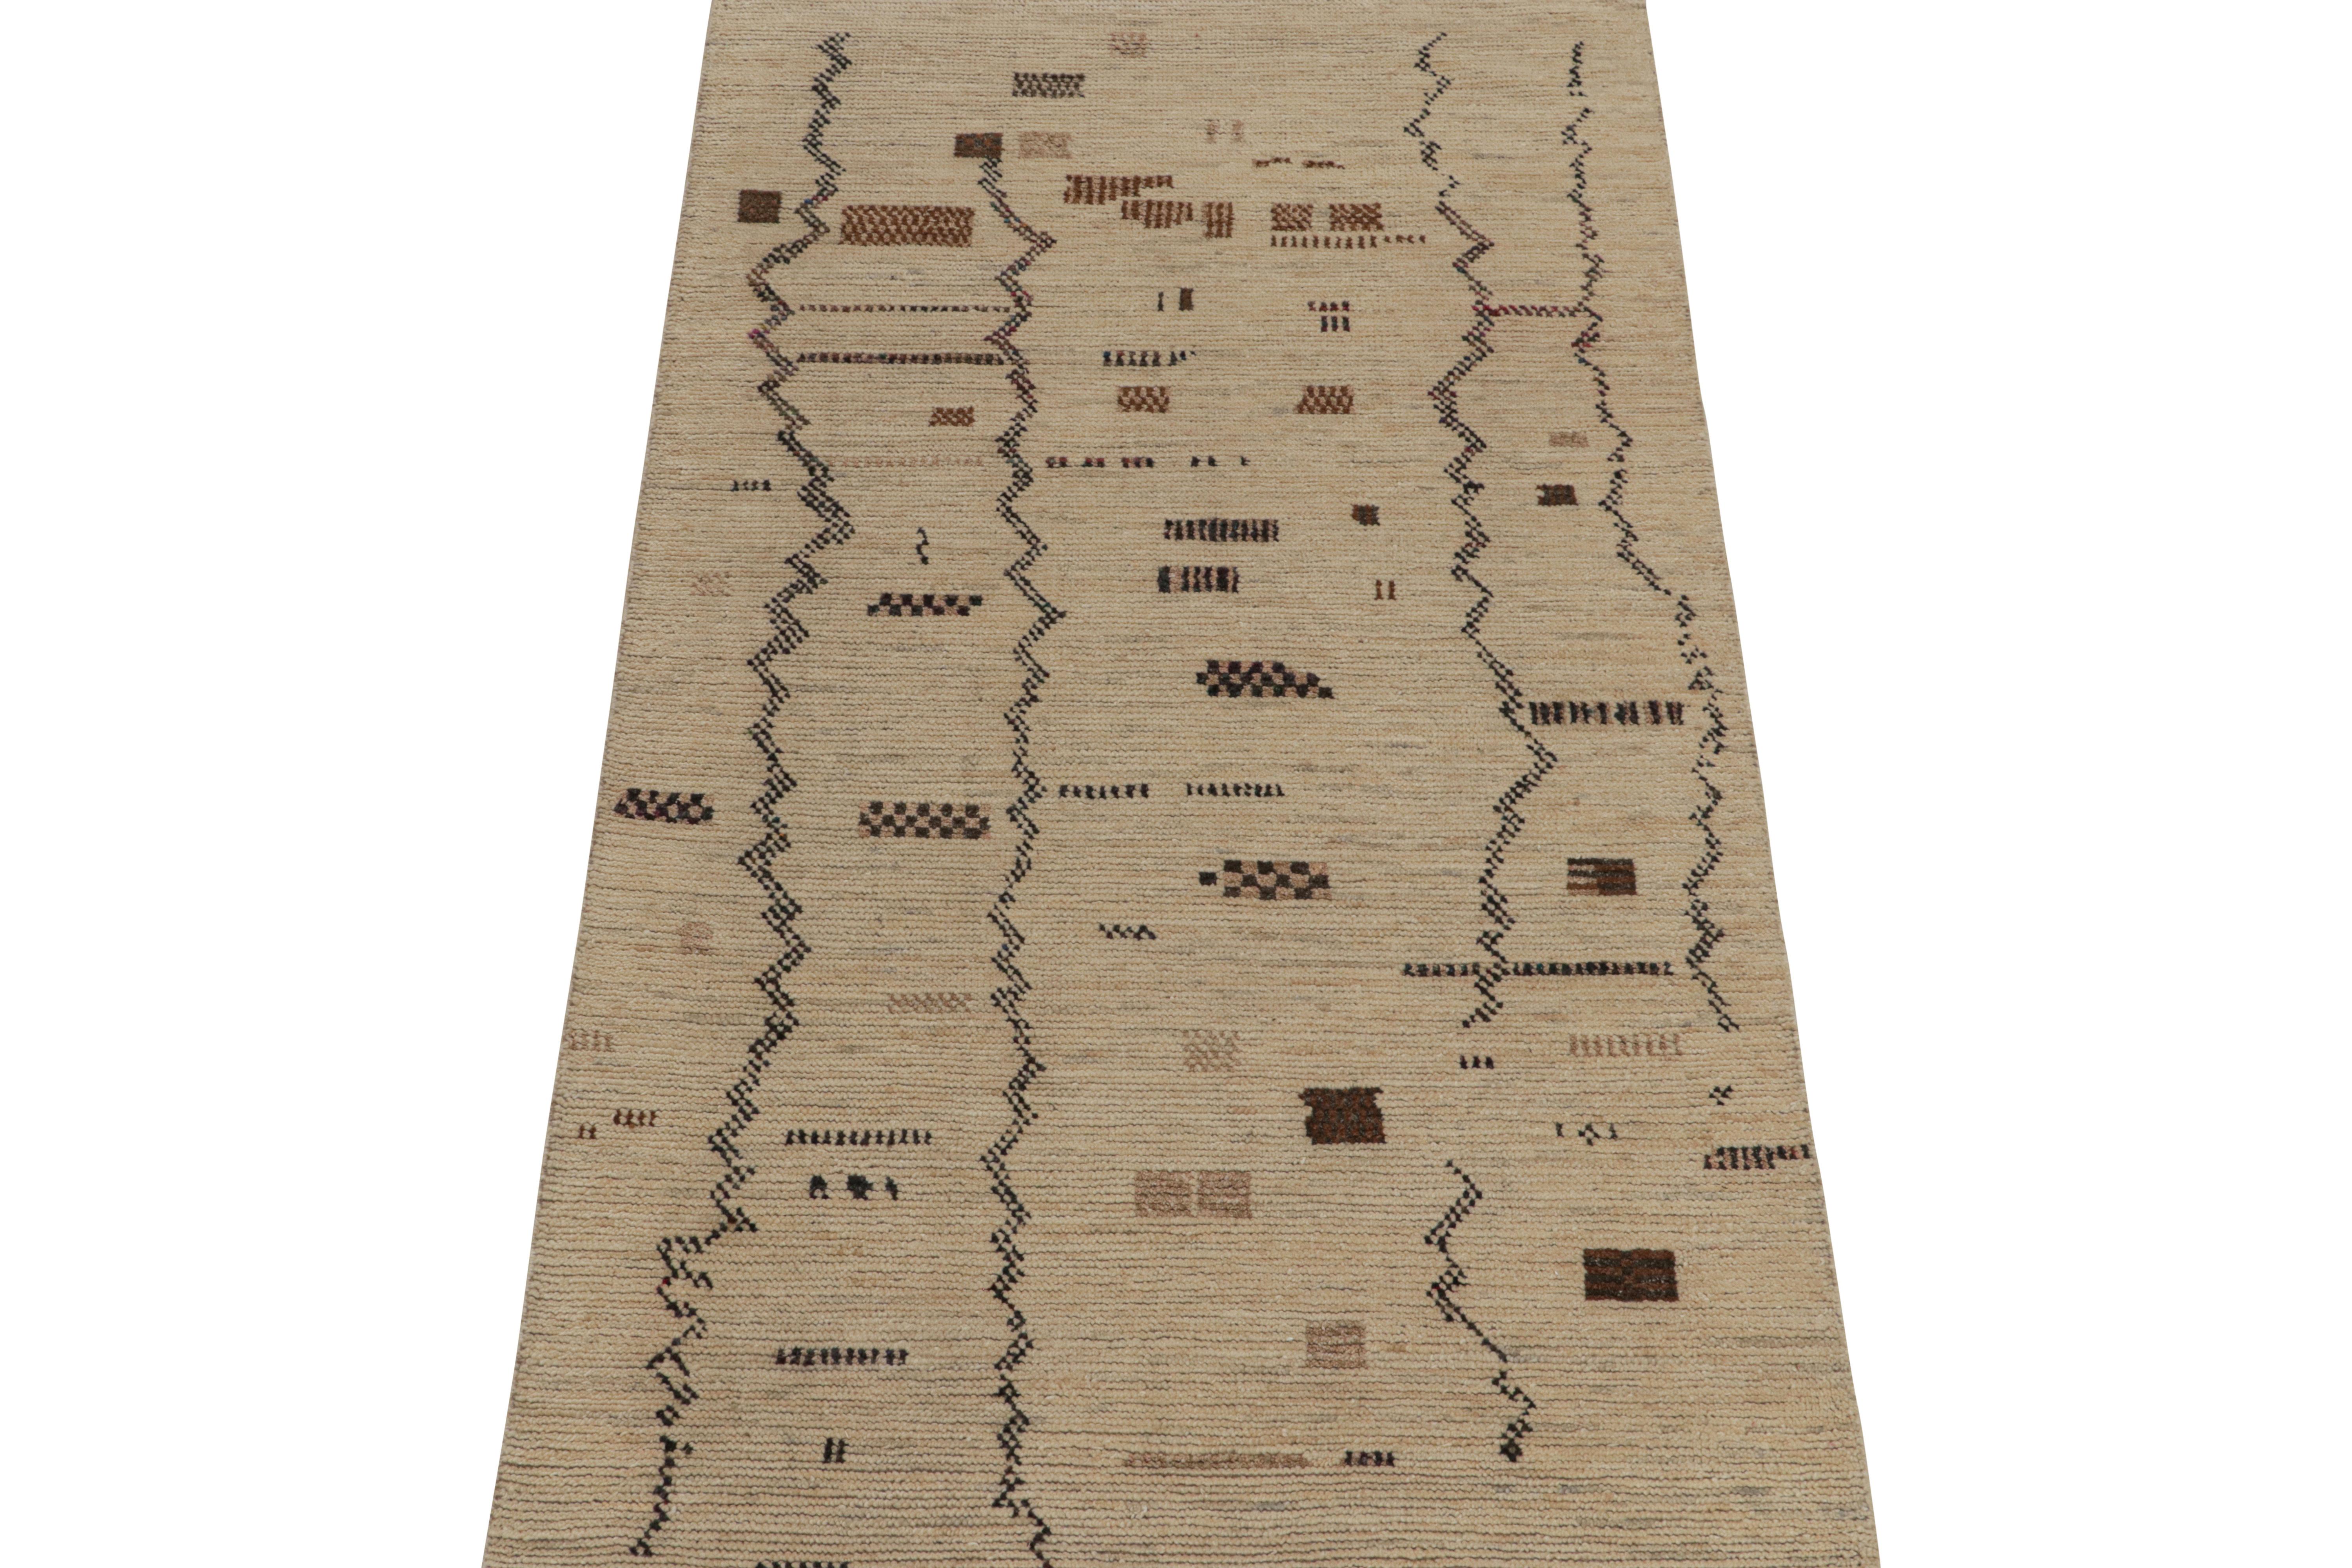 Tribal Rug & Kilim’s Moroccan Style Rug in Beige-Brown and Black Geometric Pattern For Sale